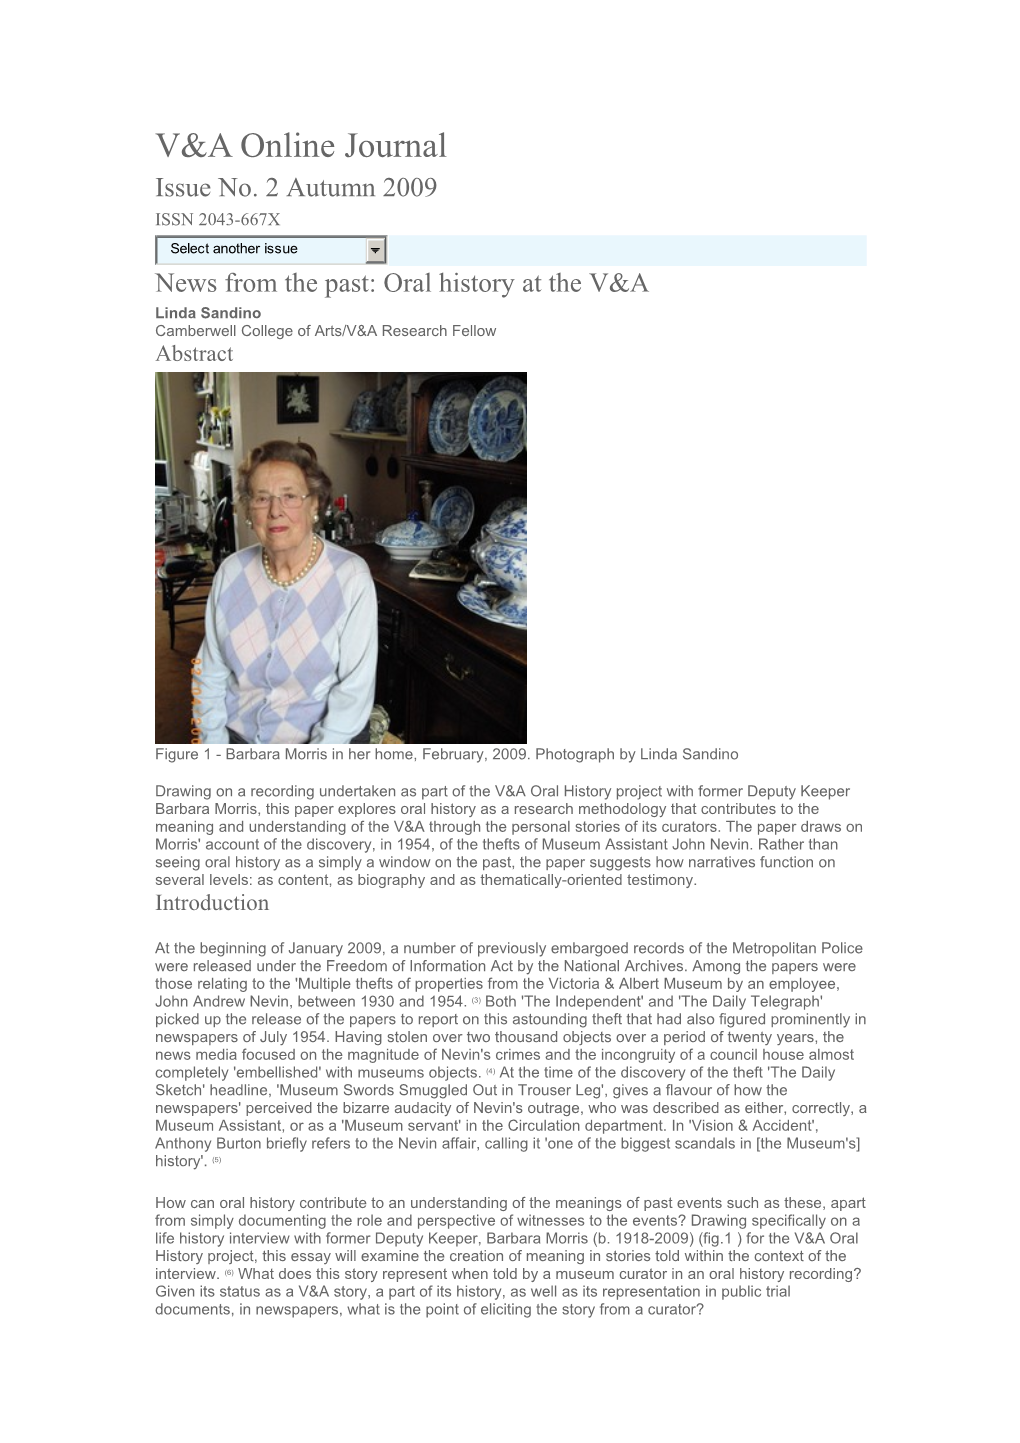 News from the Past: Oral History at the V&A